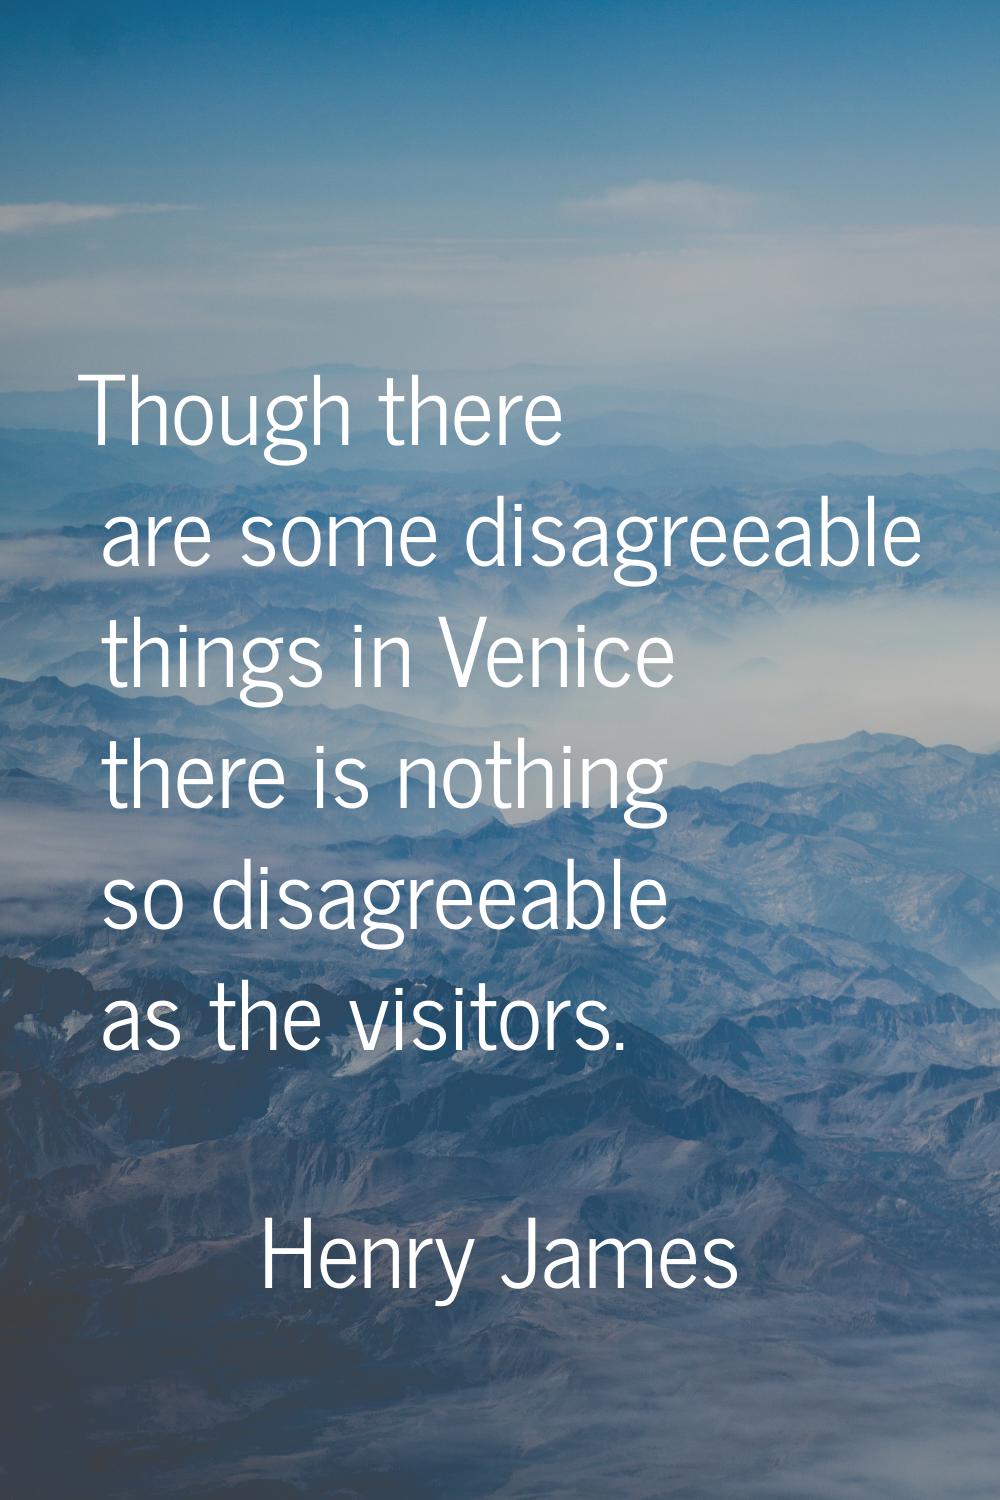 Though there are some disagreeable things in Venice there is nothing so disagreeable as the visitor